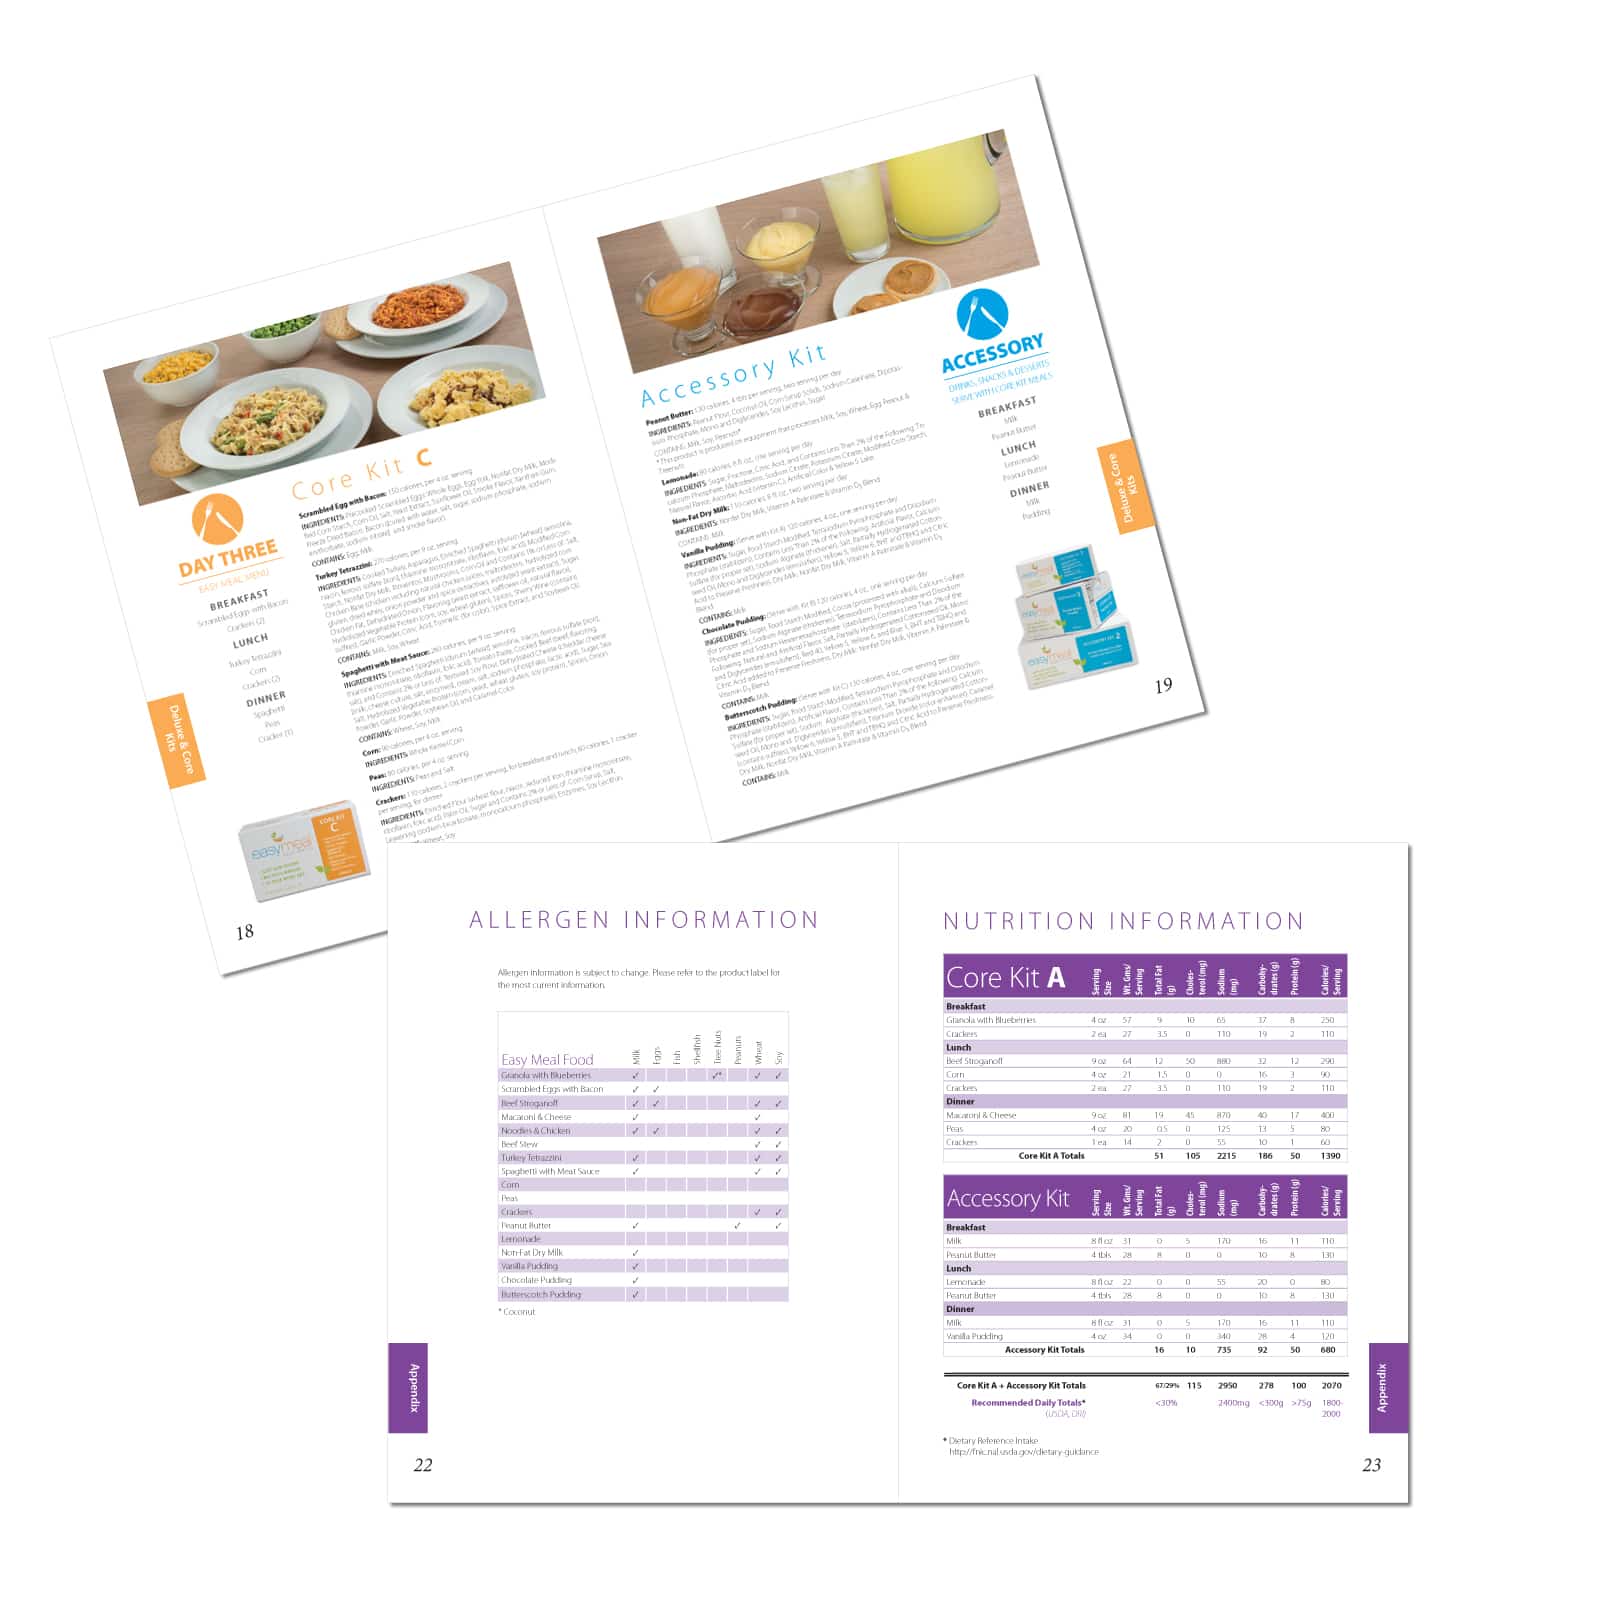 Illustration, Photography and Book Design for Easy Meal Food Service